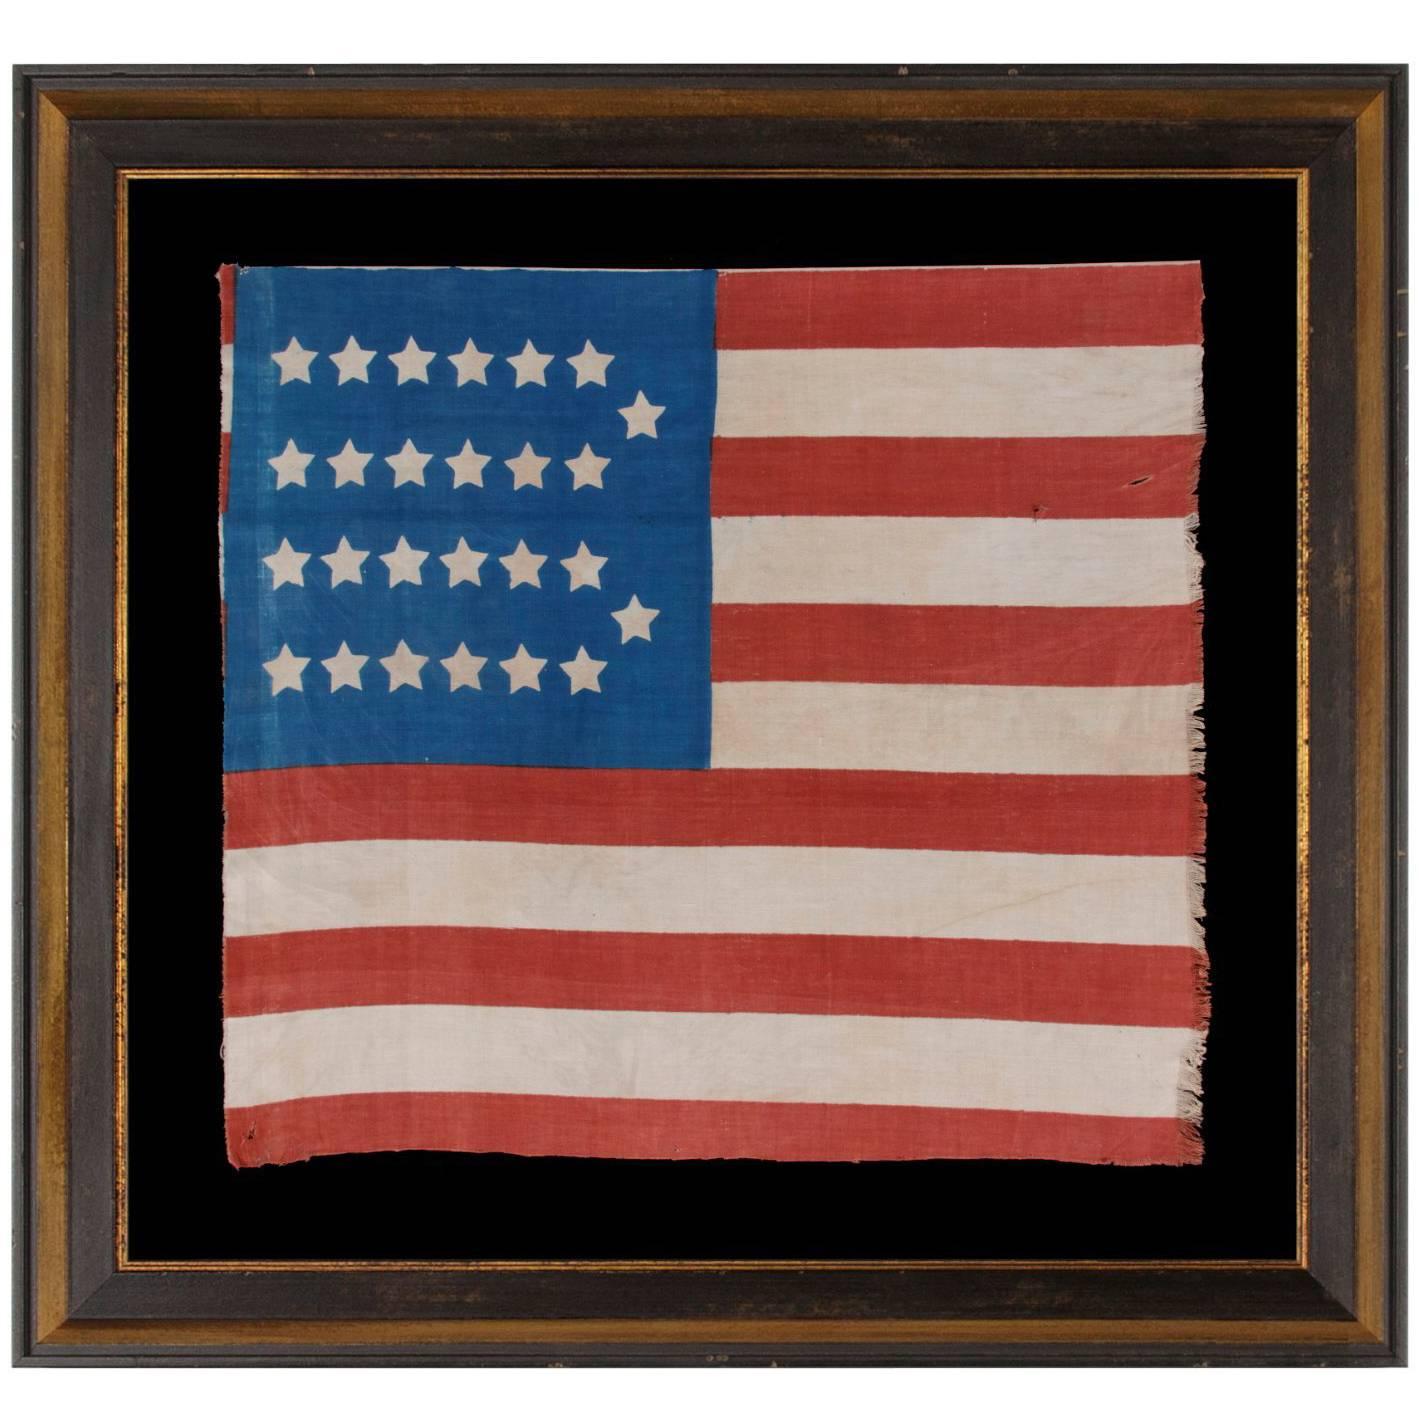 Extremely Rare, Cotton, Antiques American Parade Flag with 26 Stars